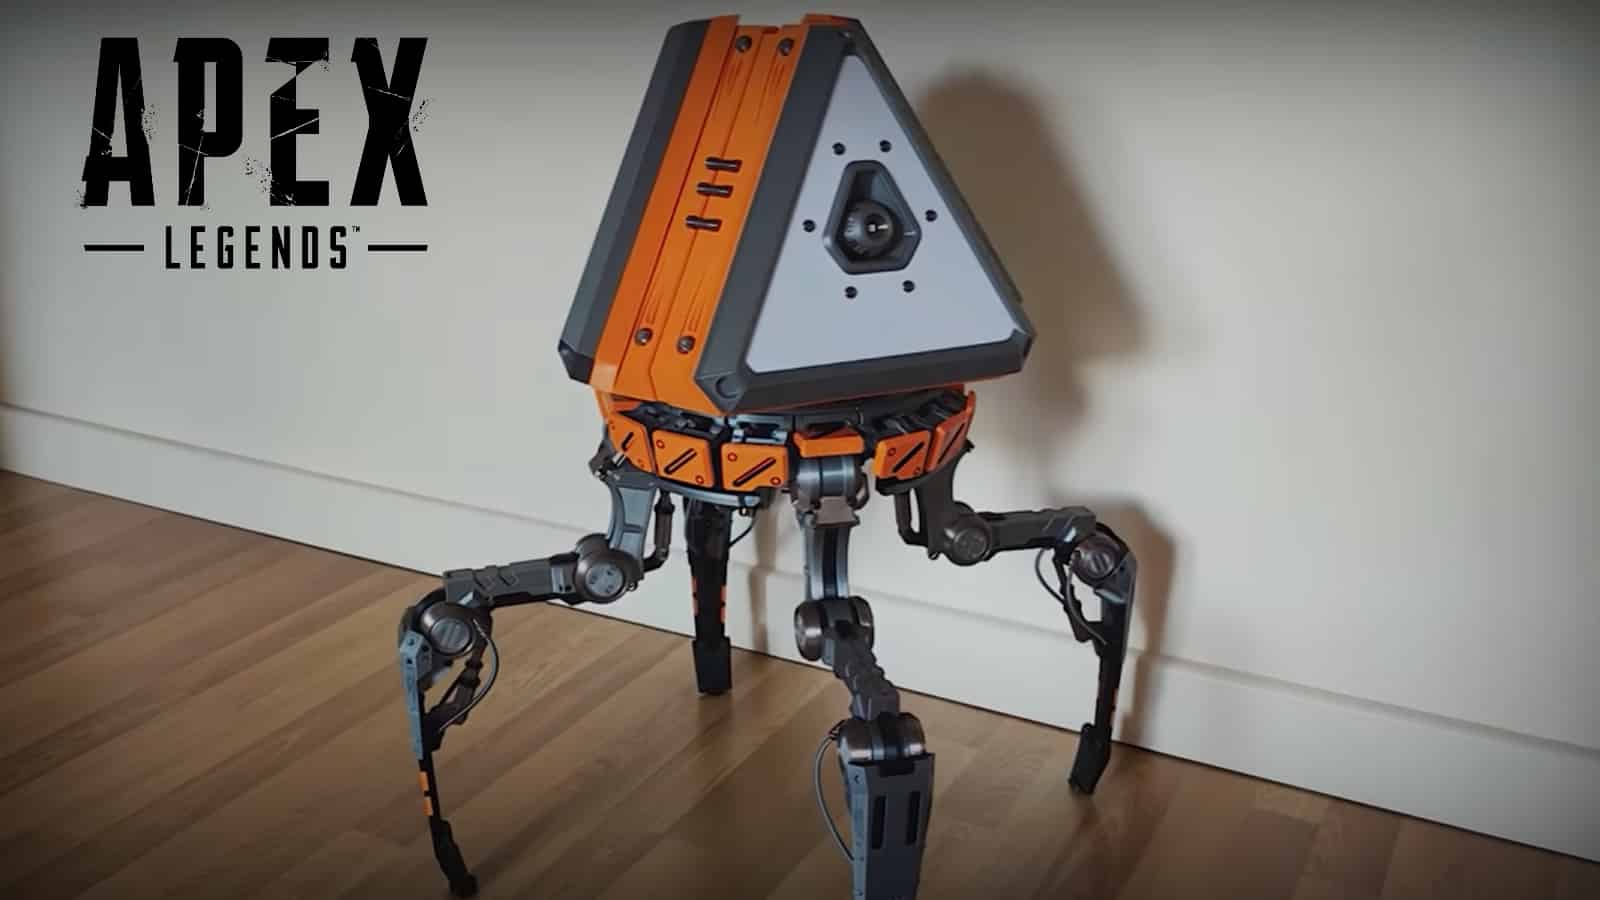 Apex Legends real-life robotic loot tick stands against white backdrop